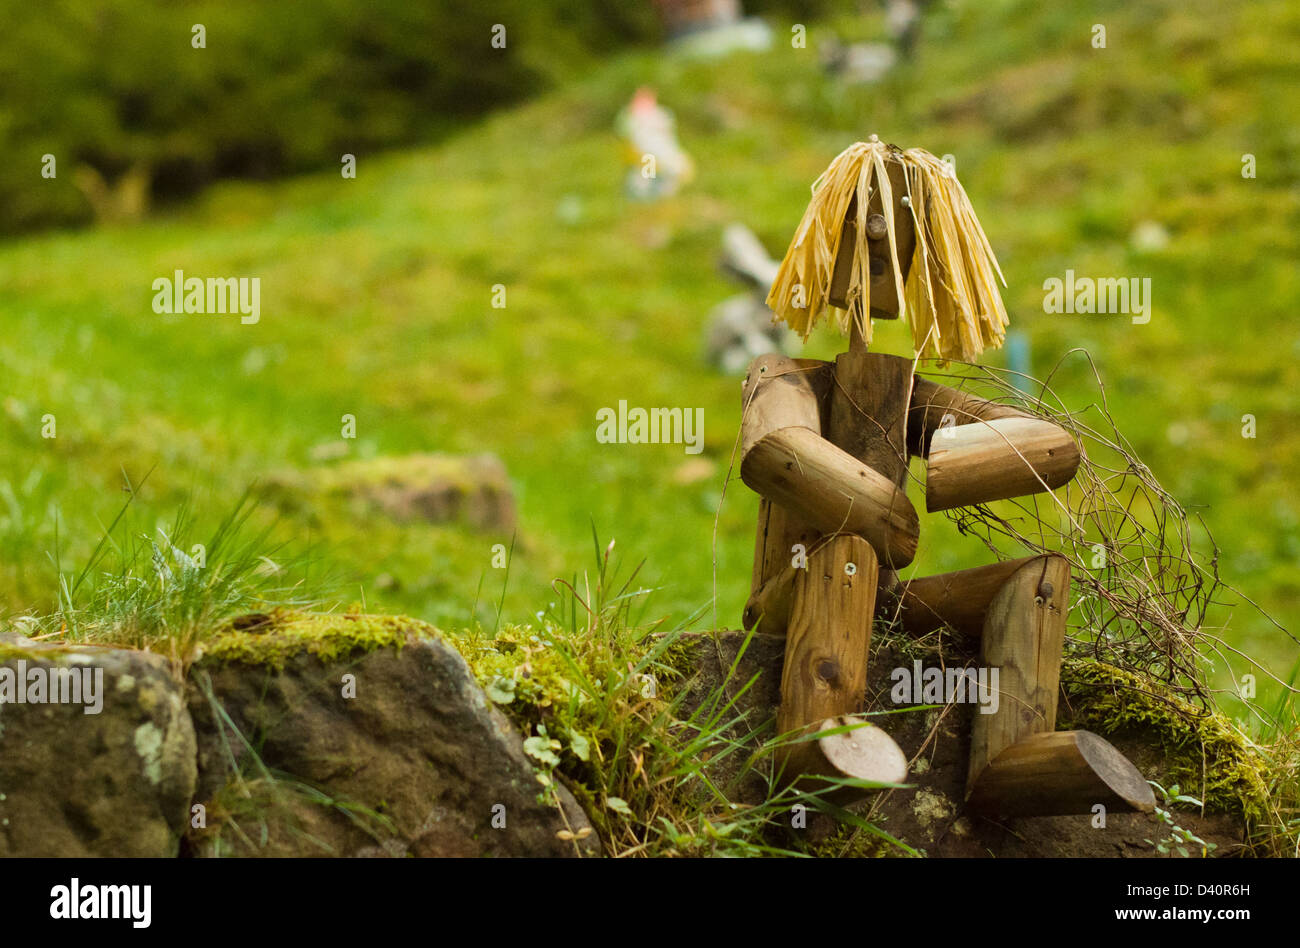 little, doll, wooden man, sitting, toy, one person, wood, shape, figurine Stock Photo